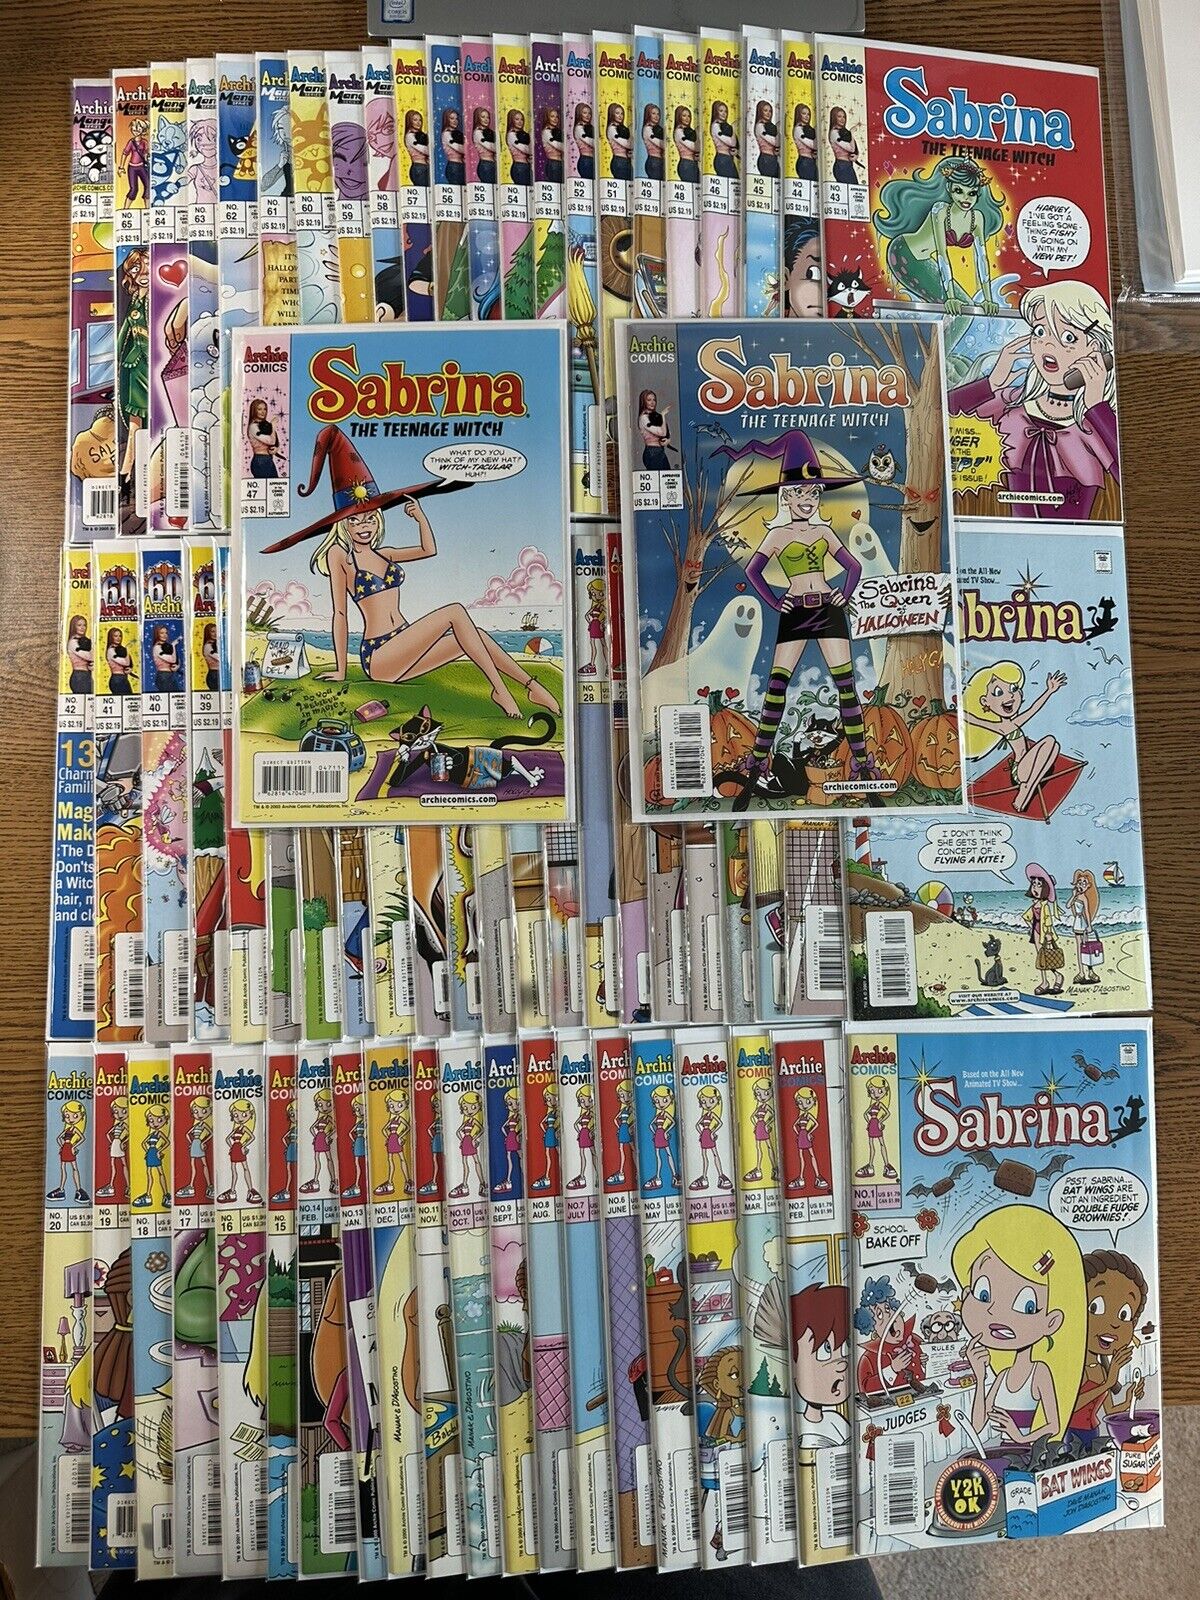 Sabrina the Teenage Witch #1-66 COMPLETE Lot Run 1999 Archie Comics #47 #50 Vol3